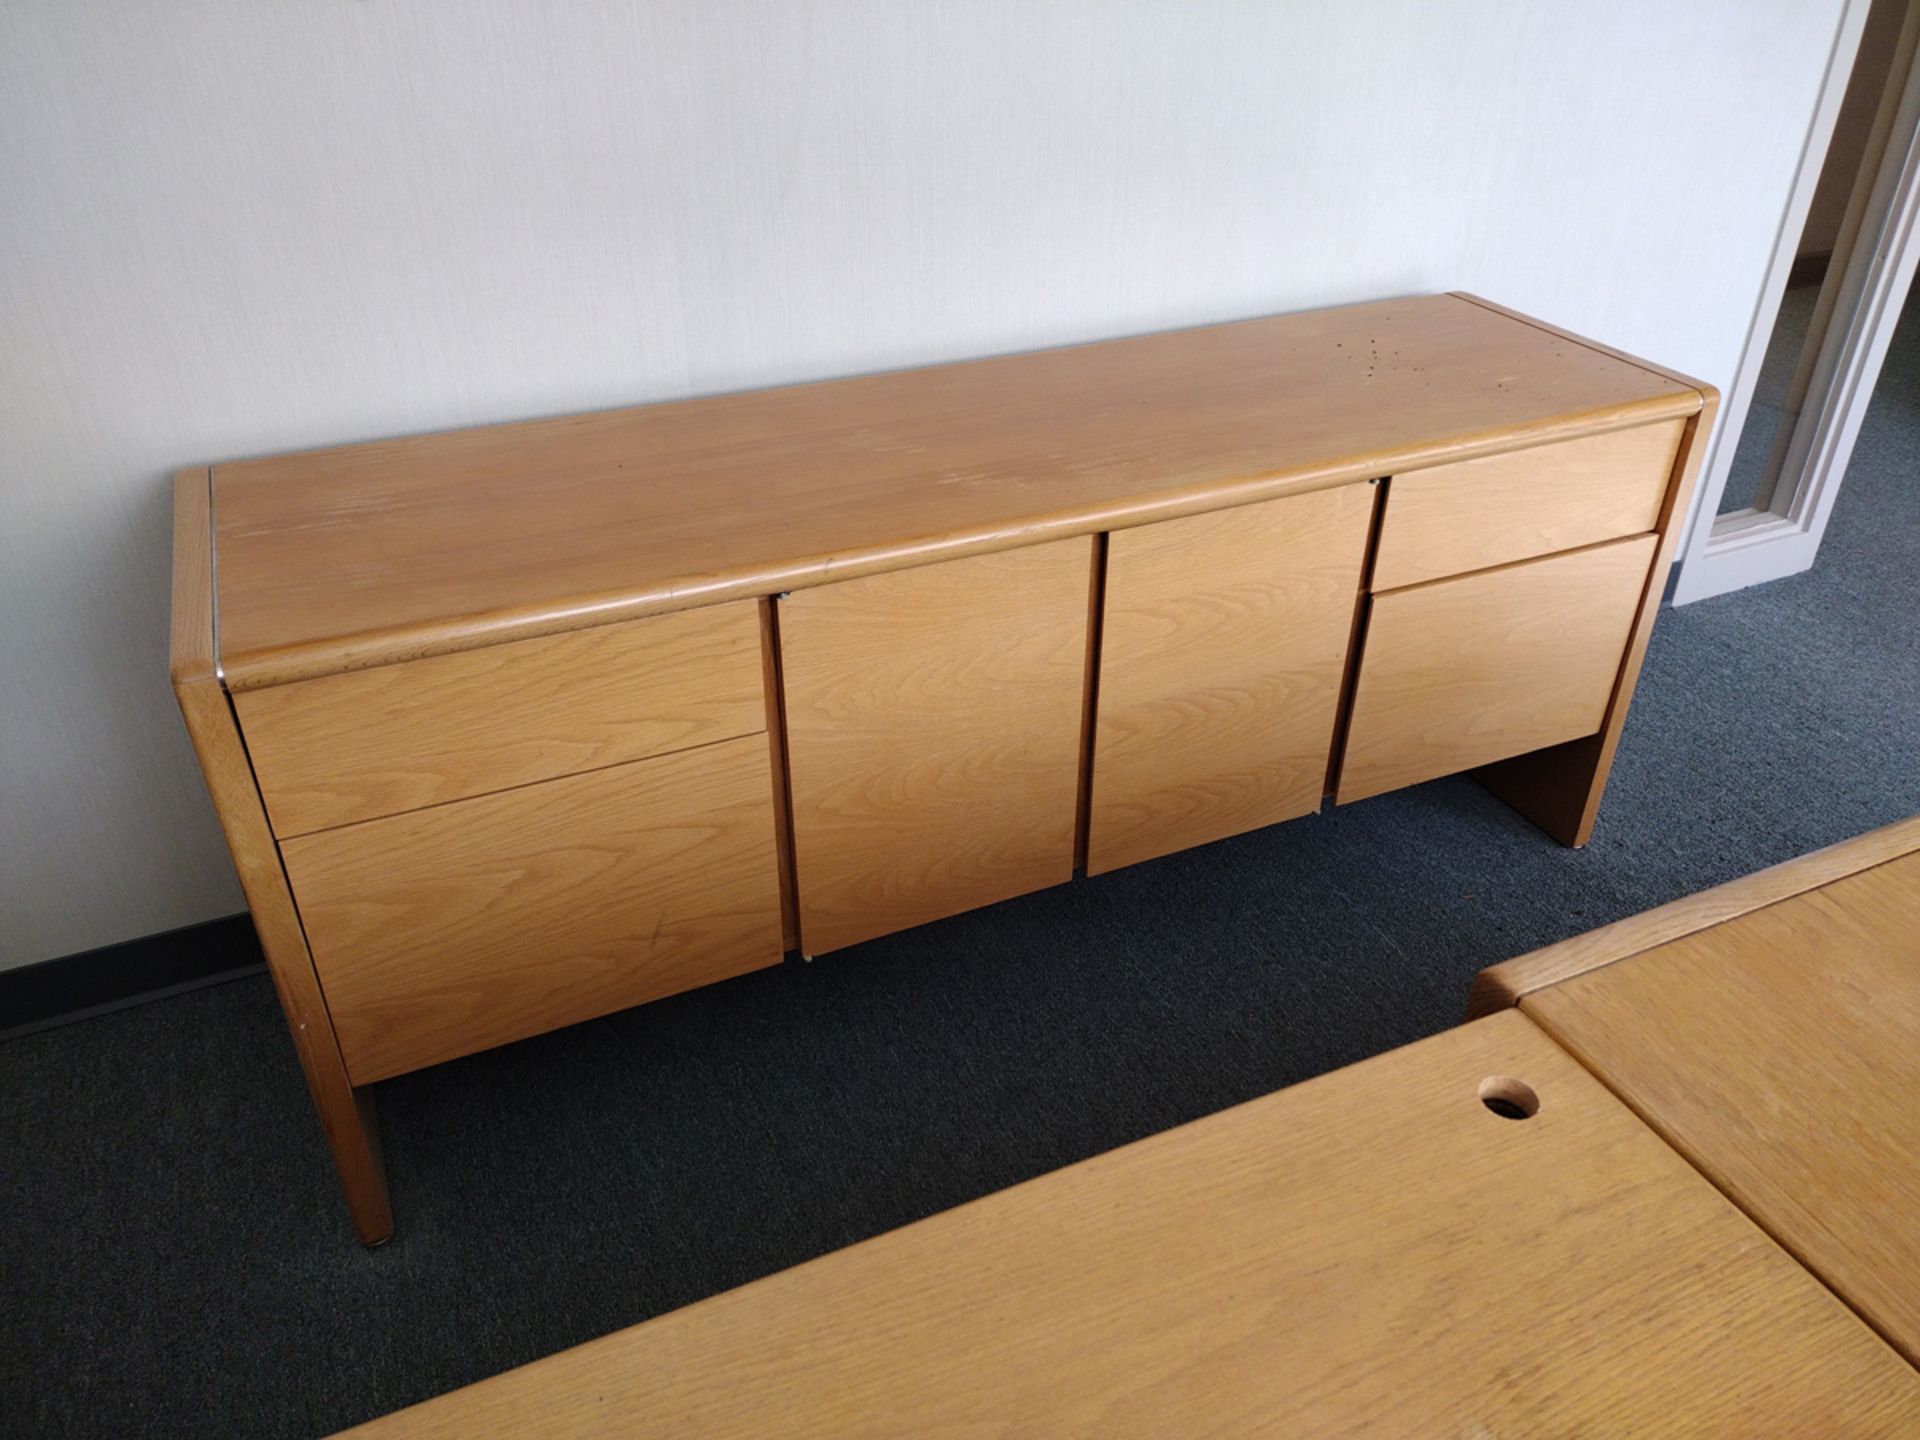 Group of Office Furniture Throughout Rooms - Image 8 of 8